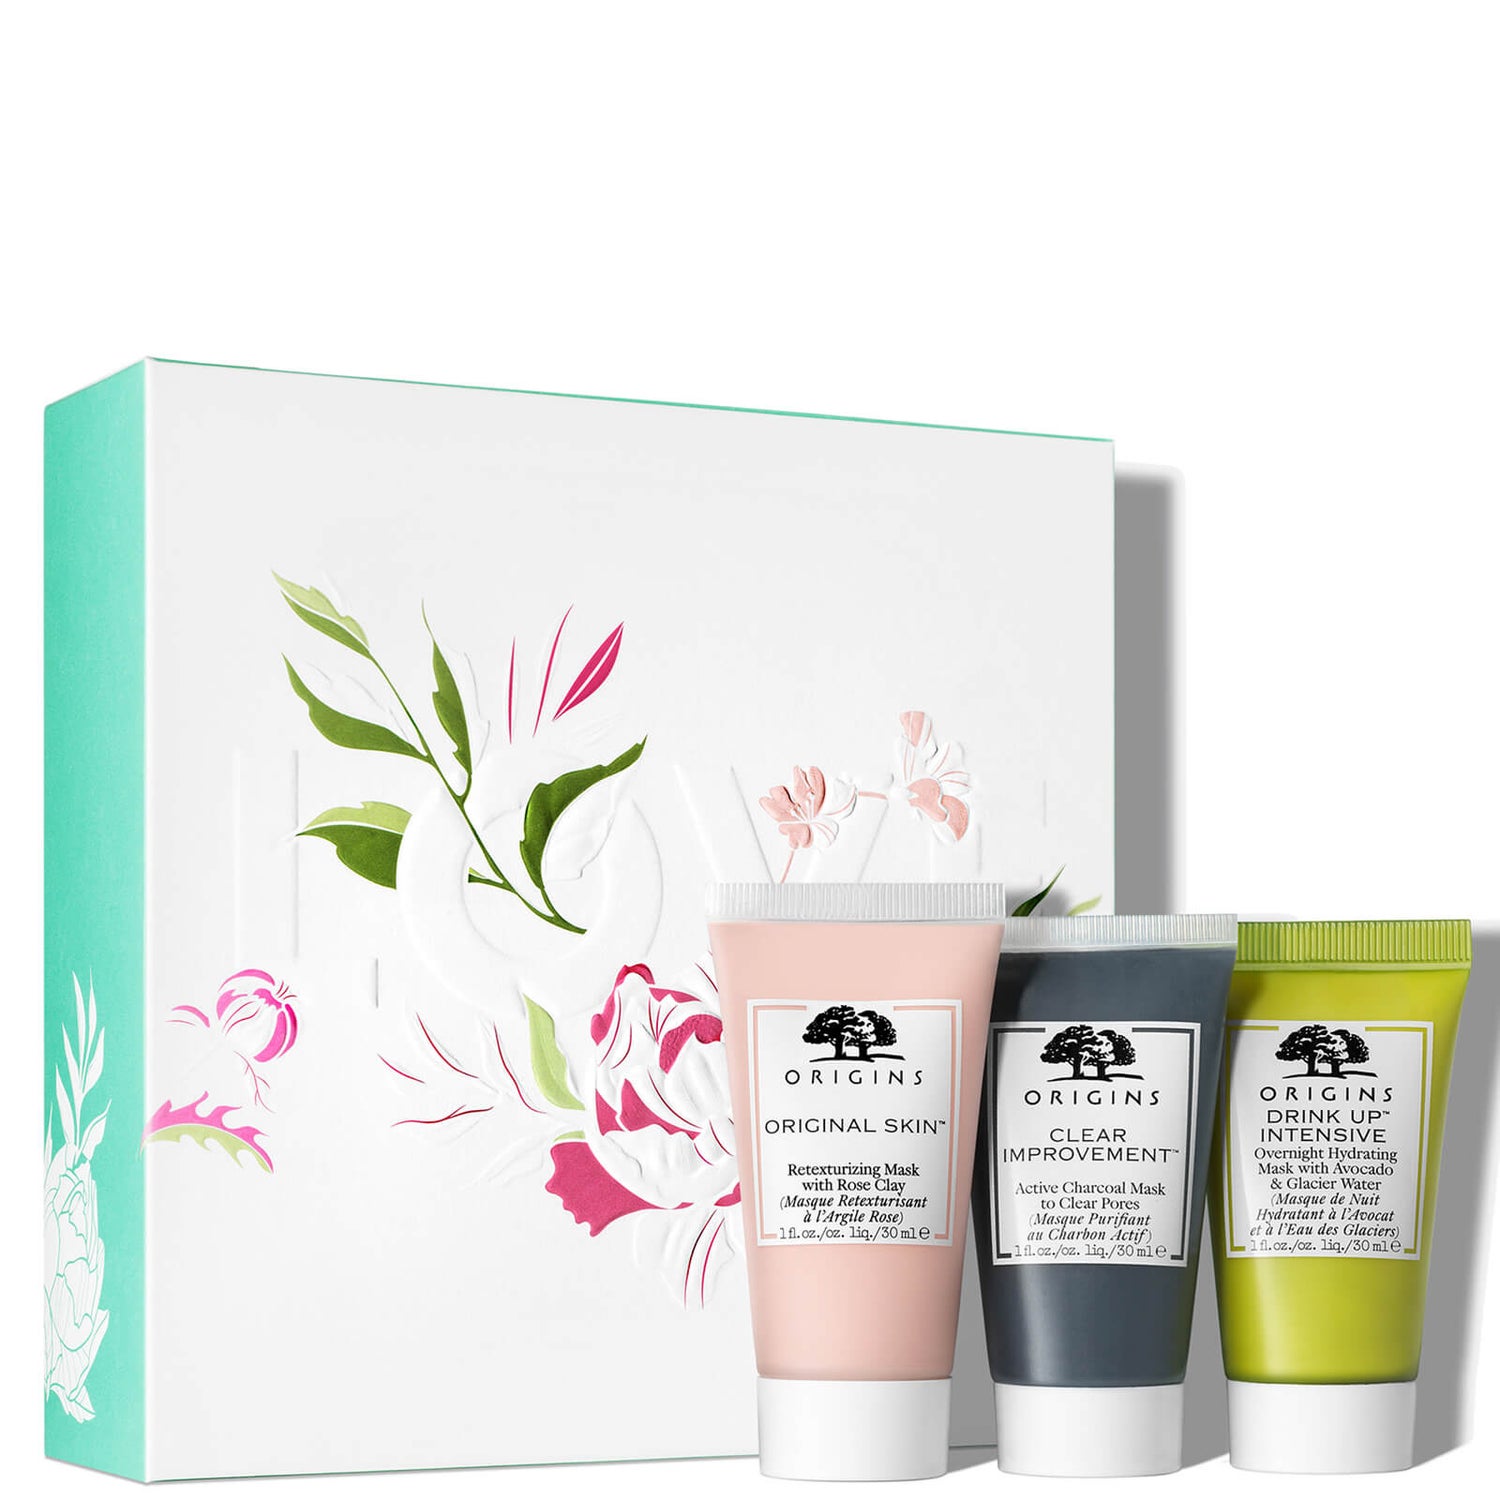 Origins LOVE AND MASK Masking Trio to Retexturize, Purify and Hydrate (Worth 30€)